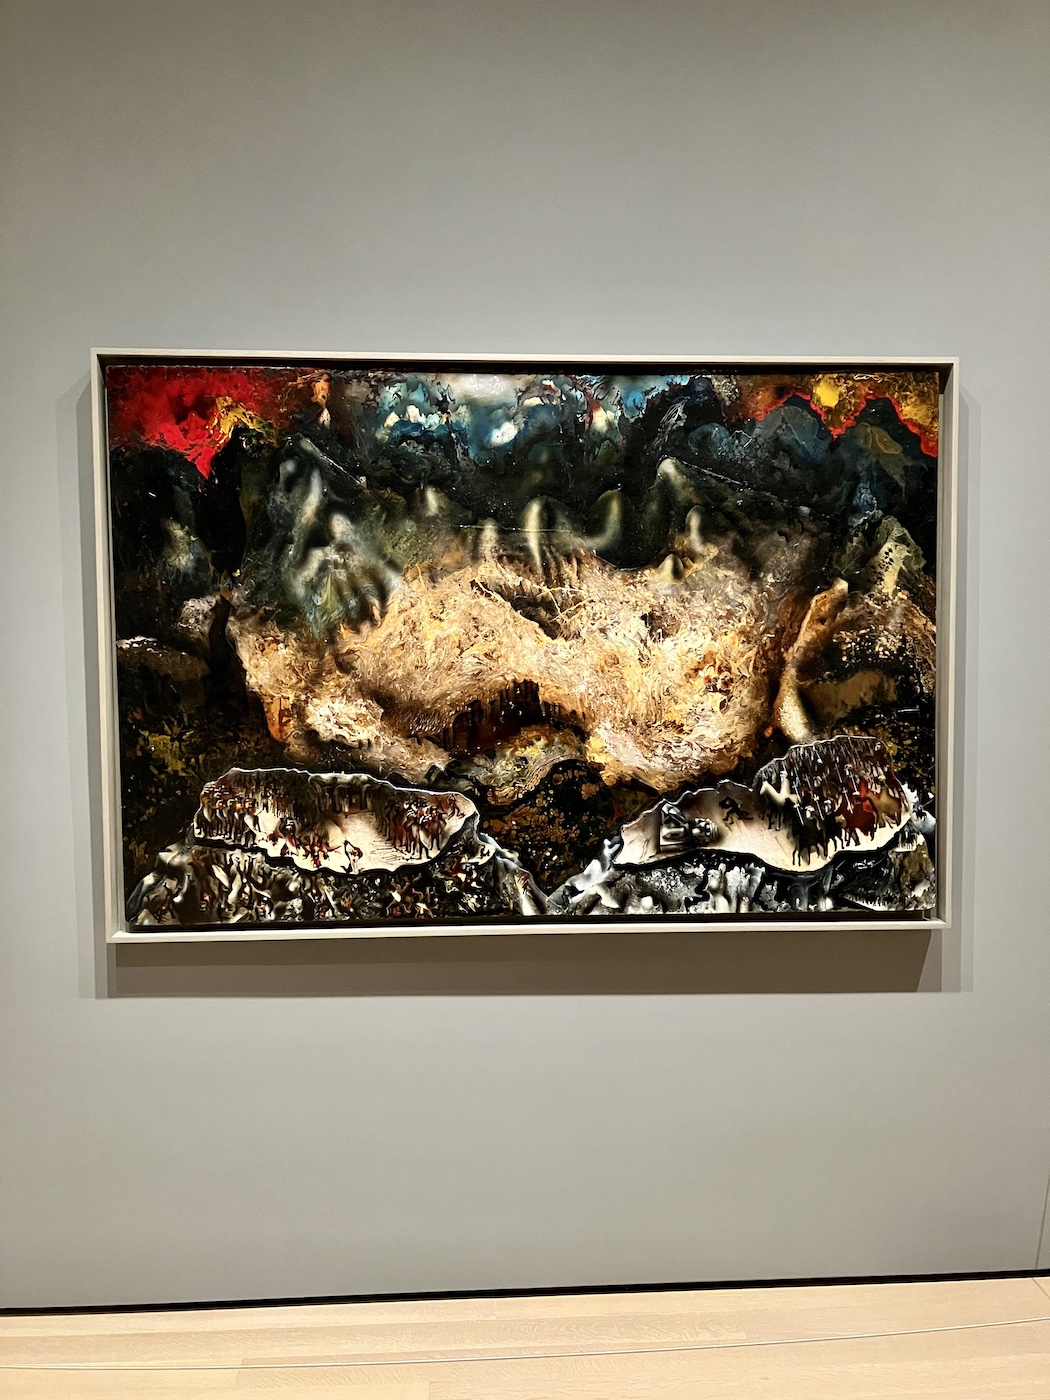 A David Alfaro Siqueiros painting on display at MoMA, the Museum of Modern Art, New York | photo By Kerwin - did he inspire Jackson Pollock?